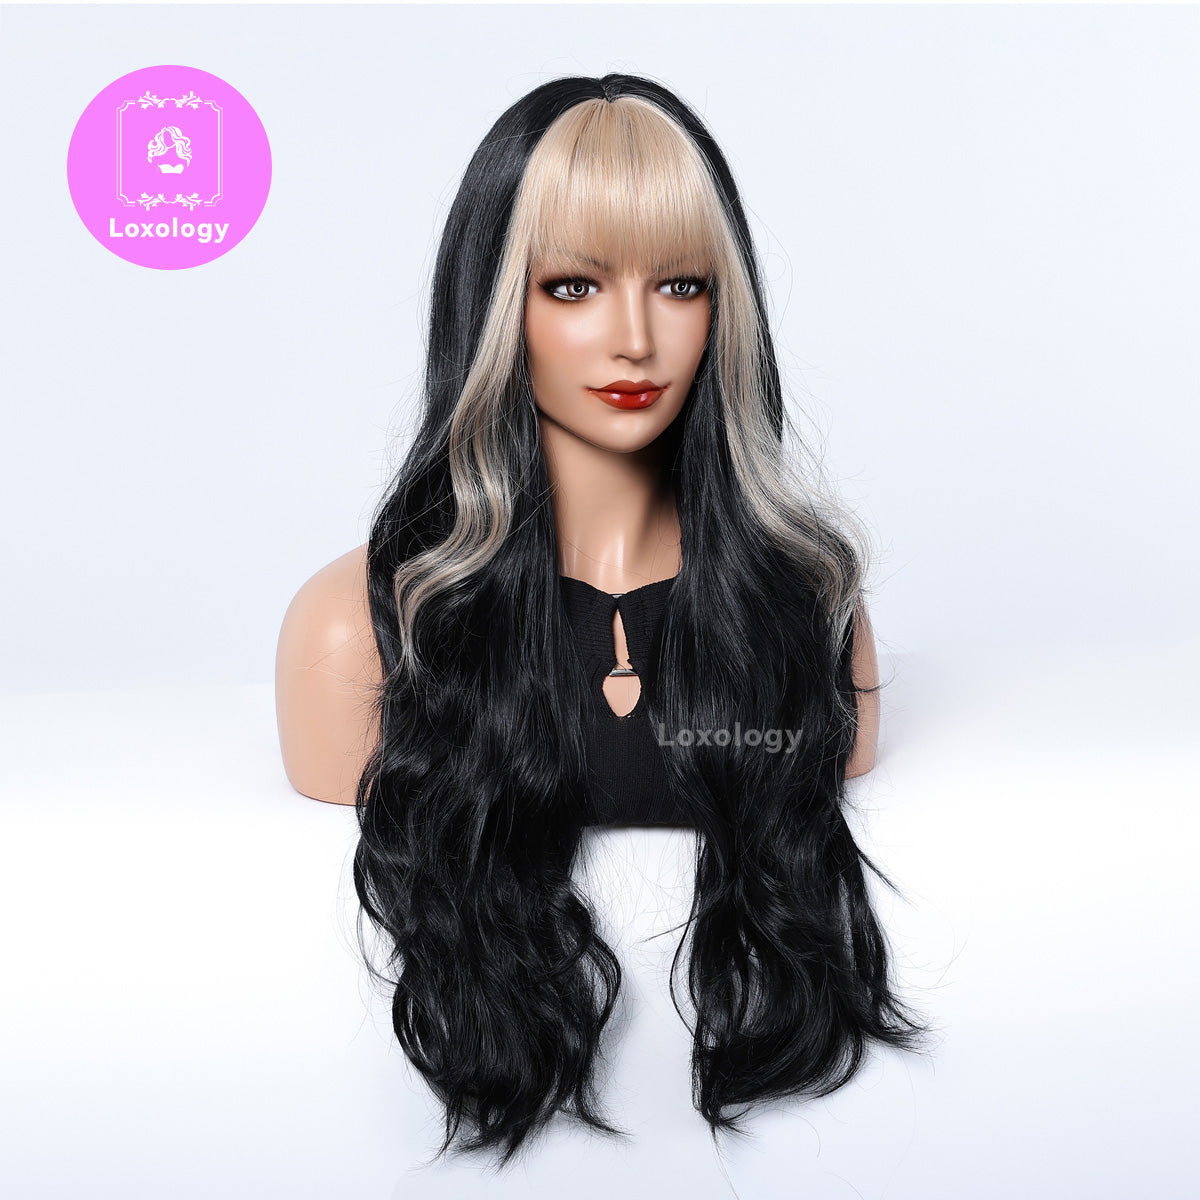 【Eulalia】Loxology | 28 Inch Long Curly Black Wigs with Blonde Bangs Synthetic Wigs